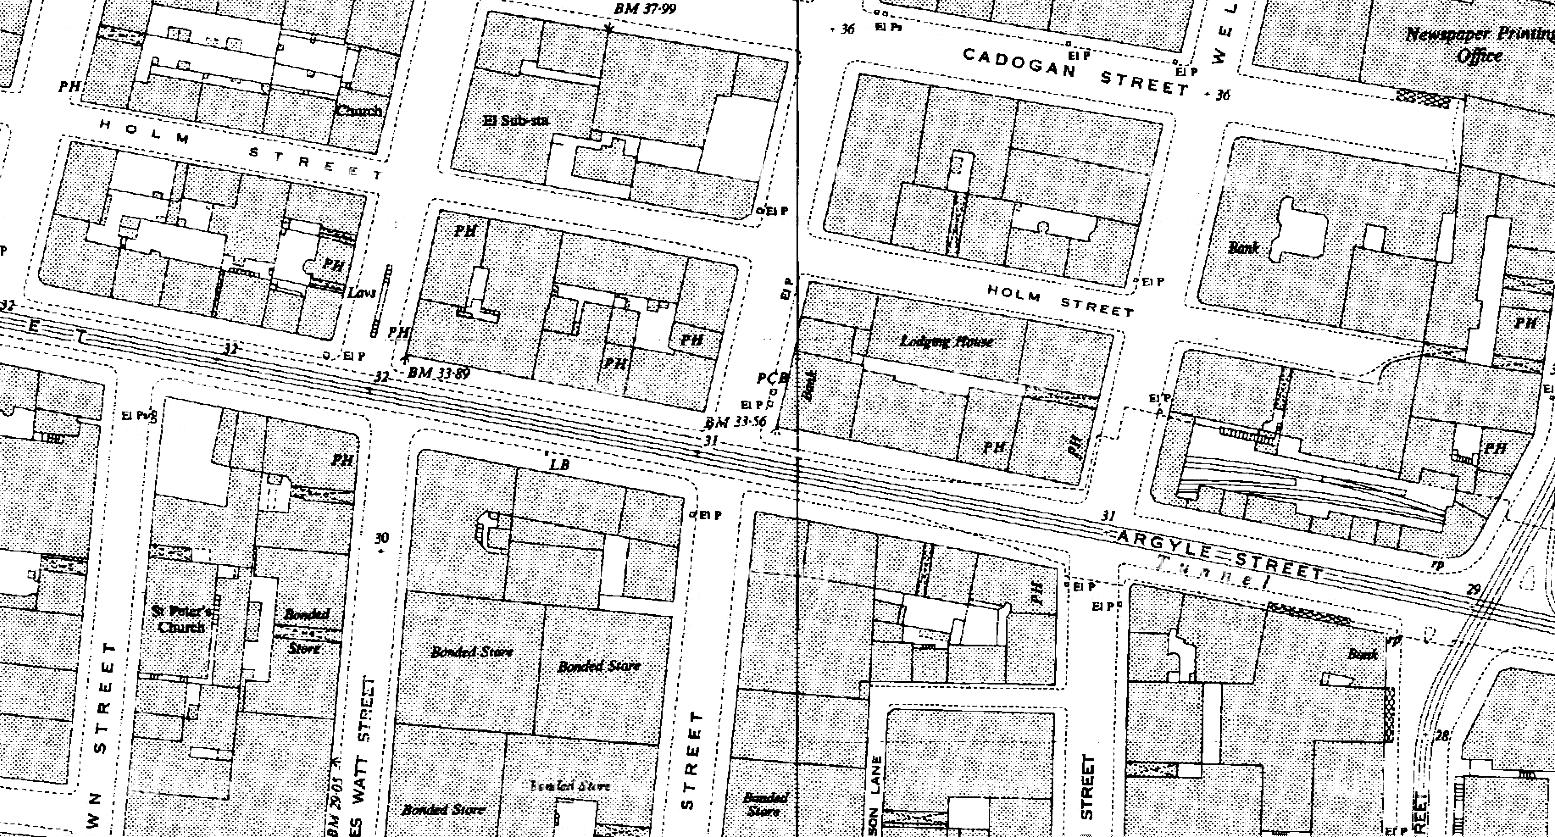 A4--West Campbell Street at Argyle Street--1952-1954 OS map extract 1-2500 scale.png